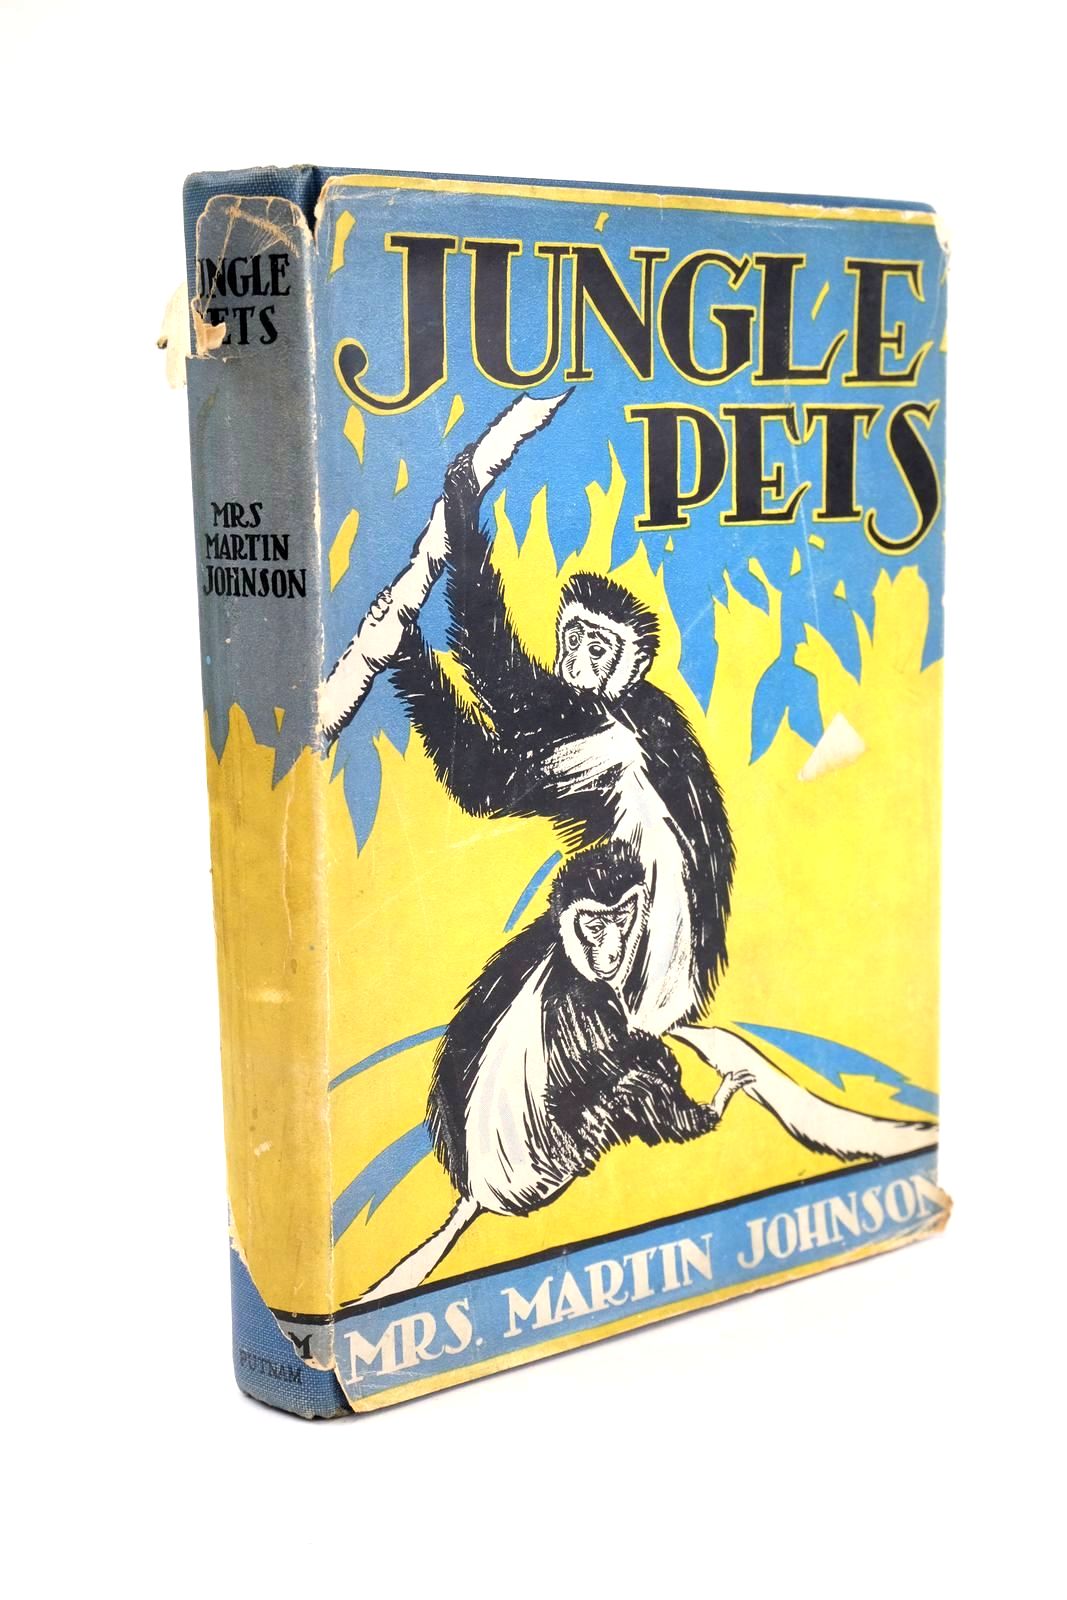 Photo of JUNGLE PETS written by Johnson, Mrs. Martin illustrated by Berry, Erick Johnson, Martin published by G.P. Putnam's Sons (STOCK CODE: 1324997)  for sale by Stella & Rose's Books